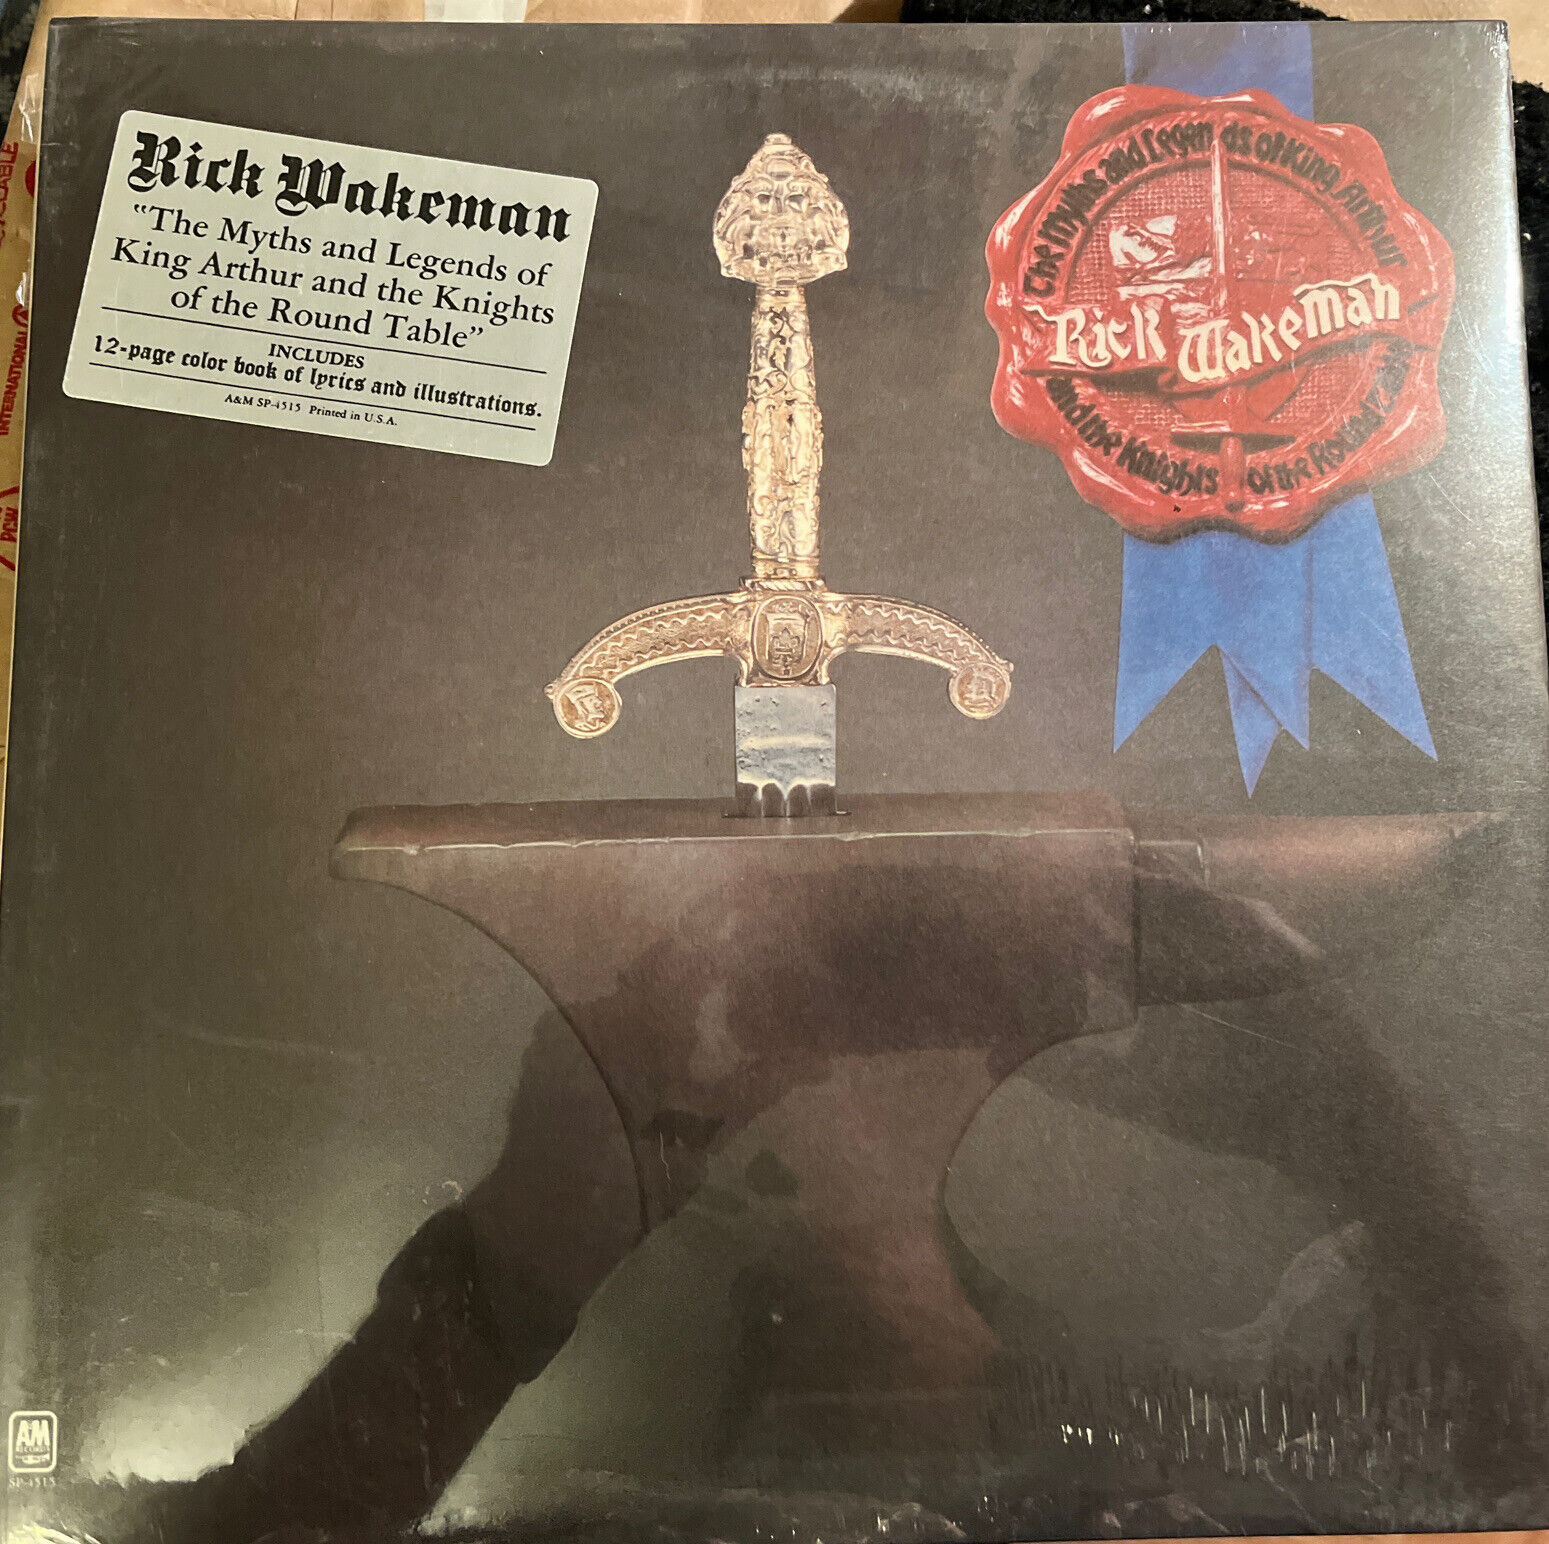 RICK WAKEMAN, The Myths And Legends Of King Arthur USA Sealed with Hype Sticker!